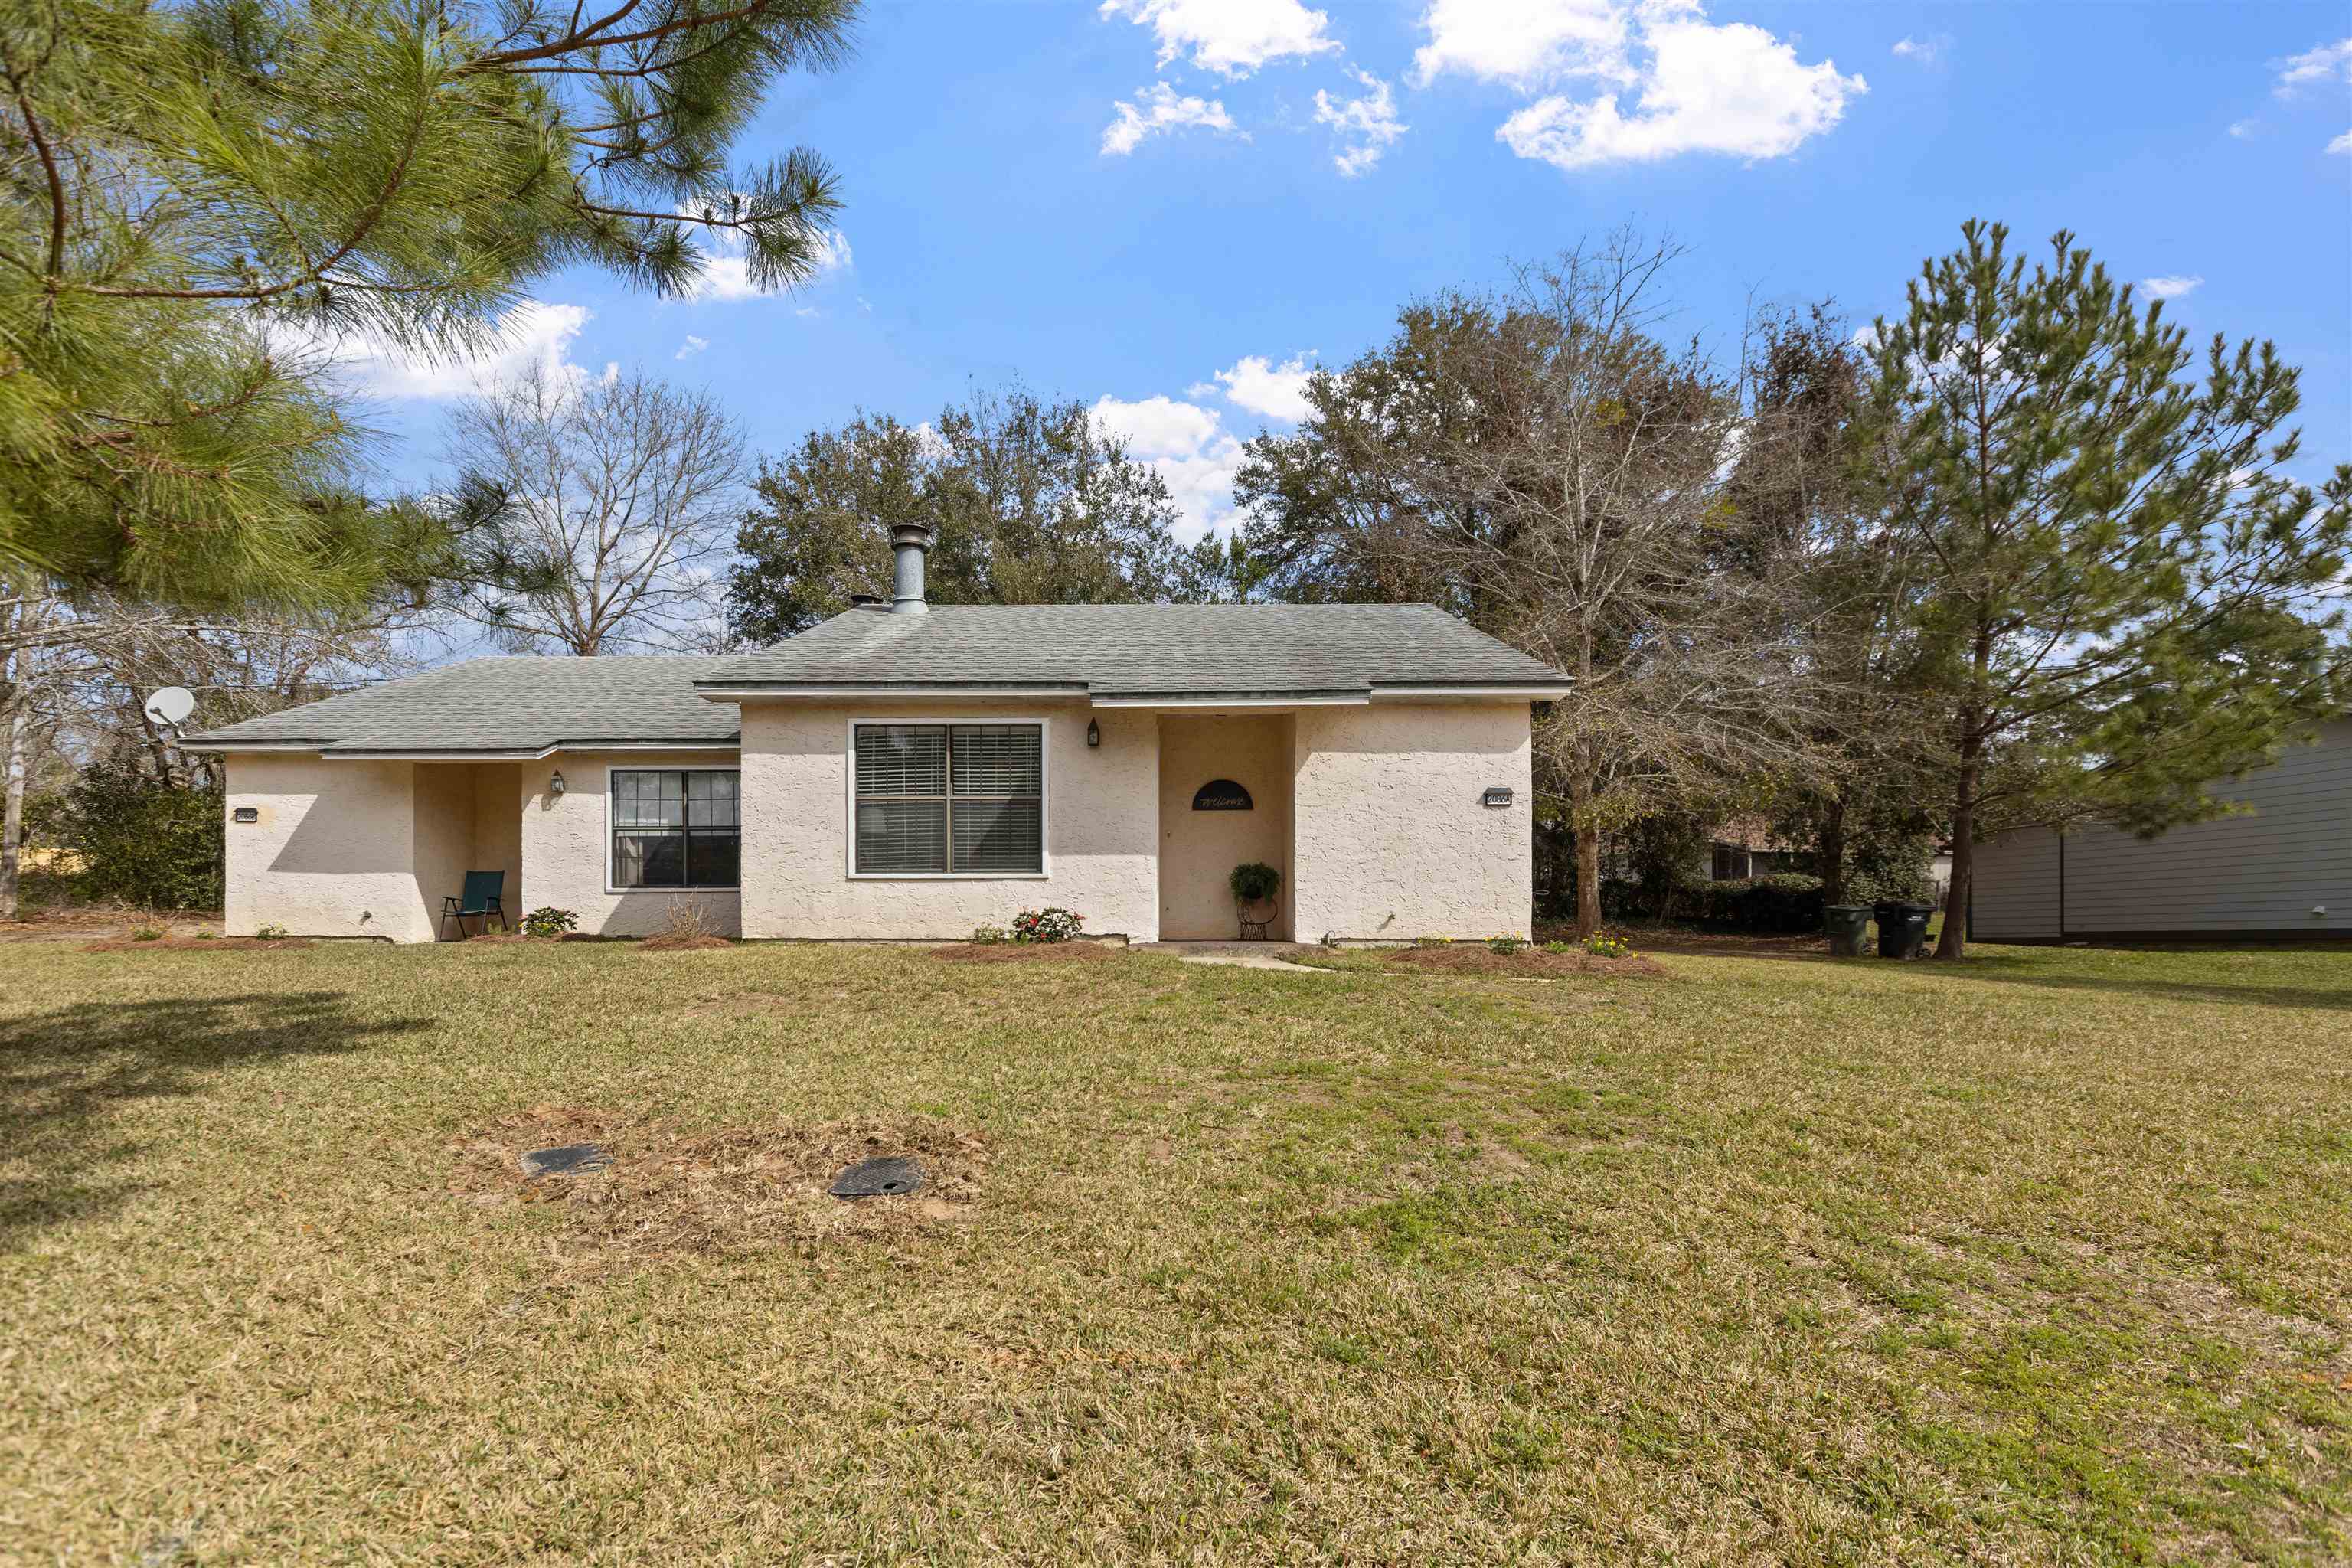 2086 Admiral,TALLAHASSEE,Florida 32308,5 Bedrooms Bedrooms,1 BathroomBathrooms,Multi-family,Admiral,366334